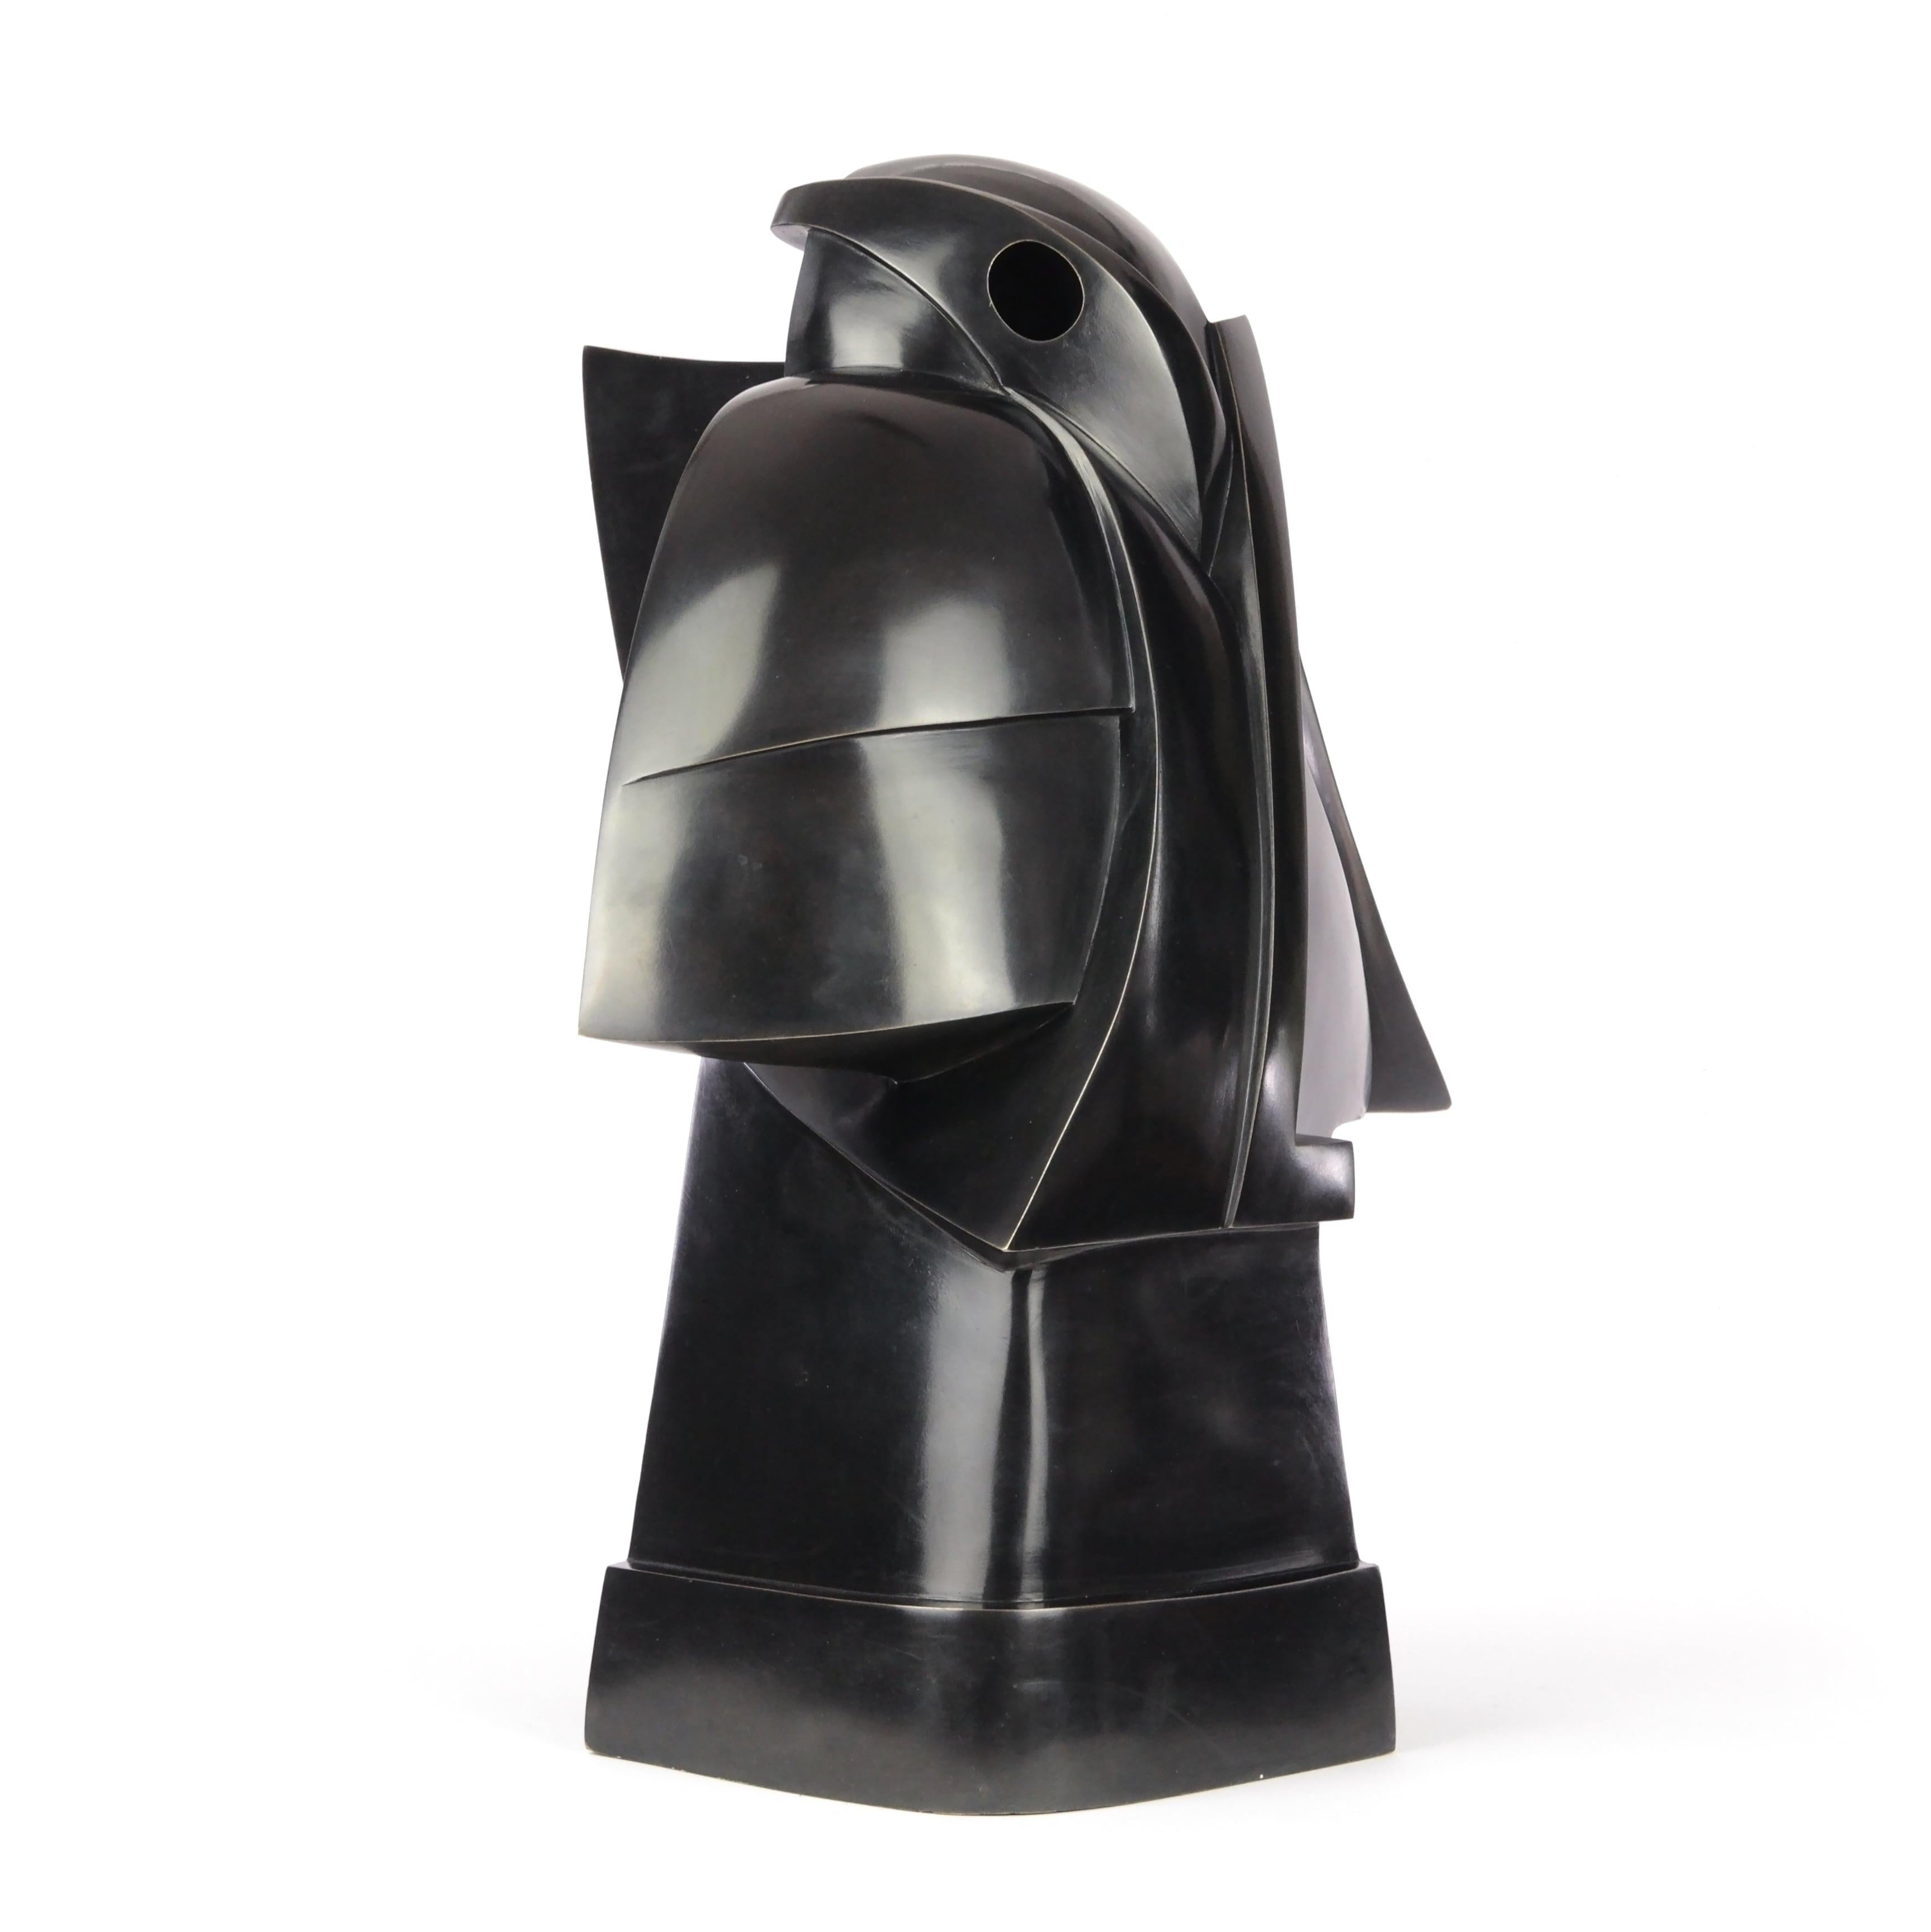 Taorakio is a bronze sculpture by contemporary artist Jacques Owczarek, dimensions are 45 × 42 × 27 cm (17.7 × 16.5 × 10.6 in). The sculpture is signed and numbered, it is part of a limited edition of 8 editions + 4 artist’s proofs, and comes with a